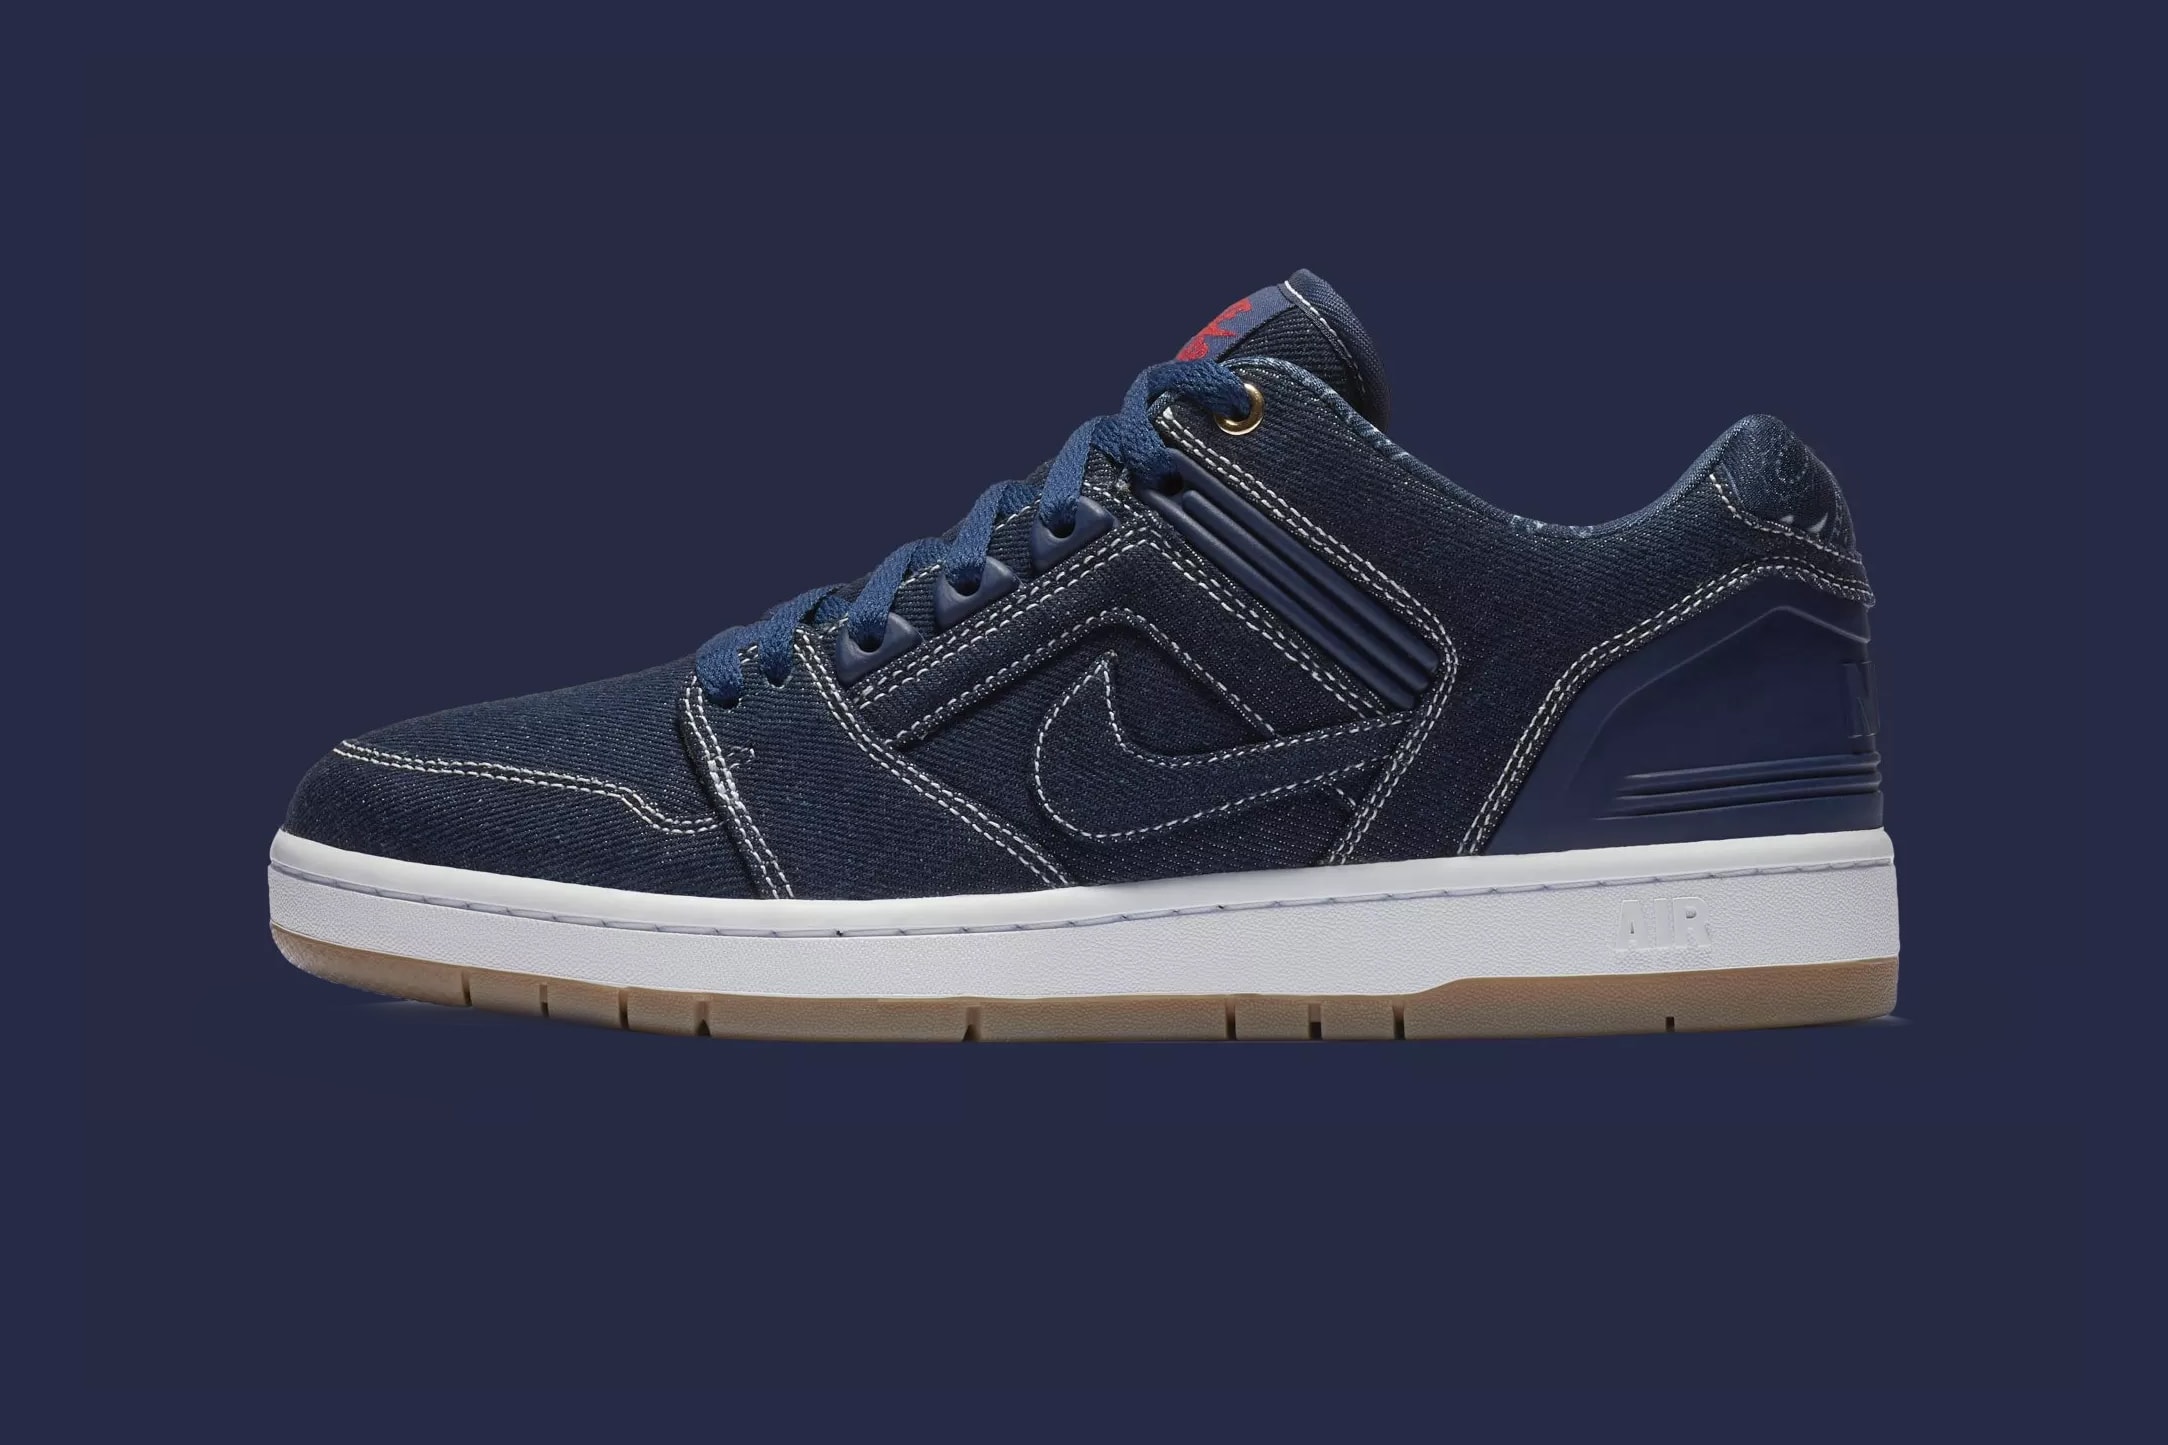 Nike SB "Rivals" Pack Includes 2Pac-Inspired Shoe Nike Air Force 2